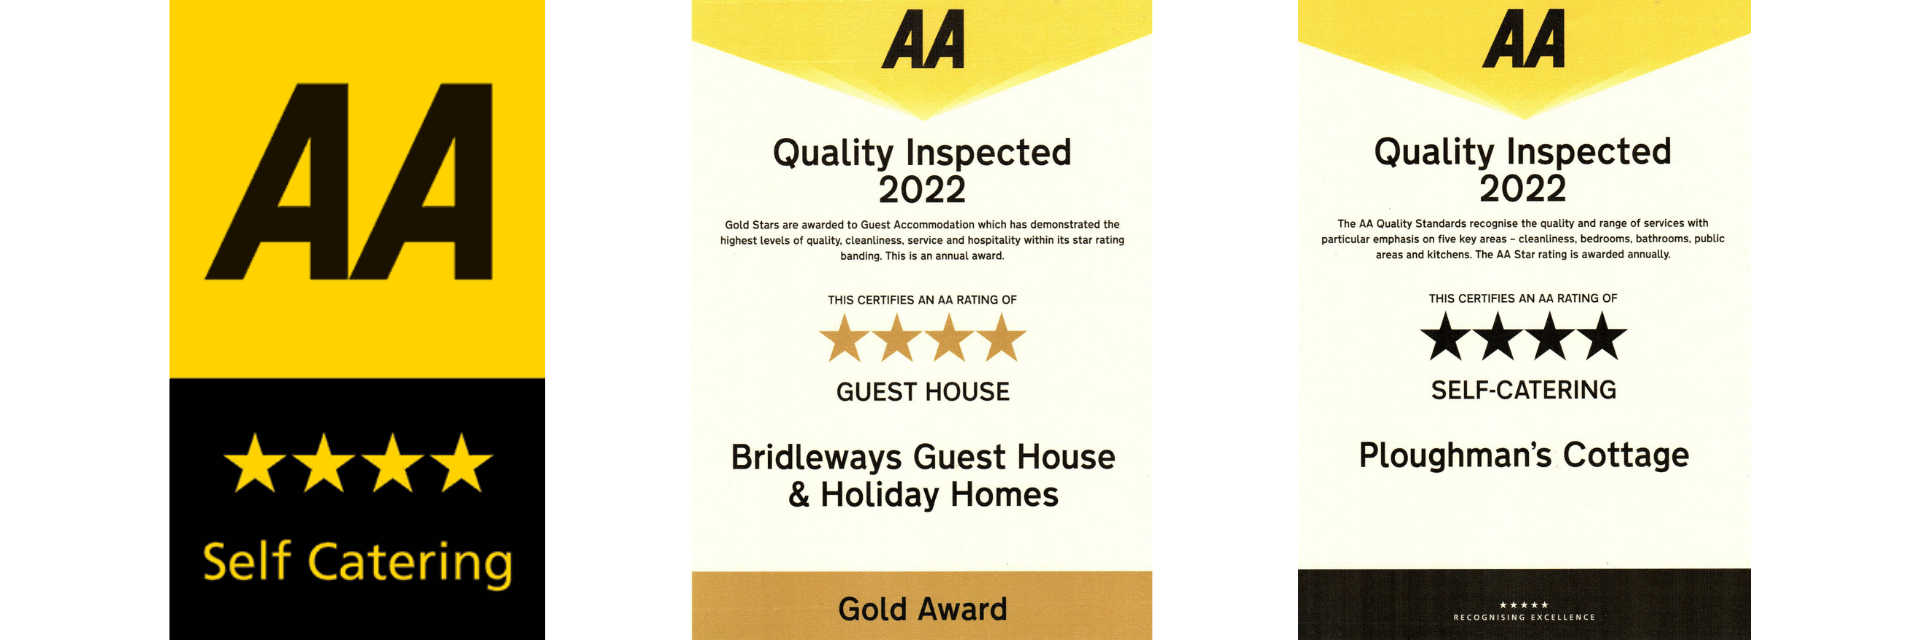 AA Four Star Guesthouse & Self Catering